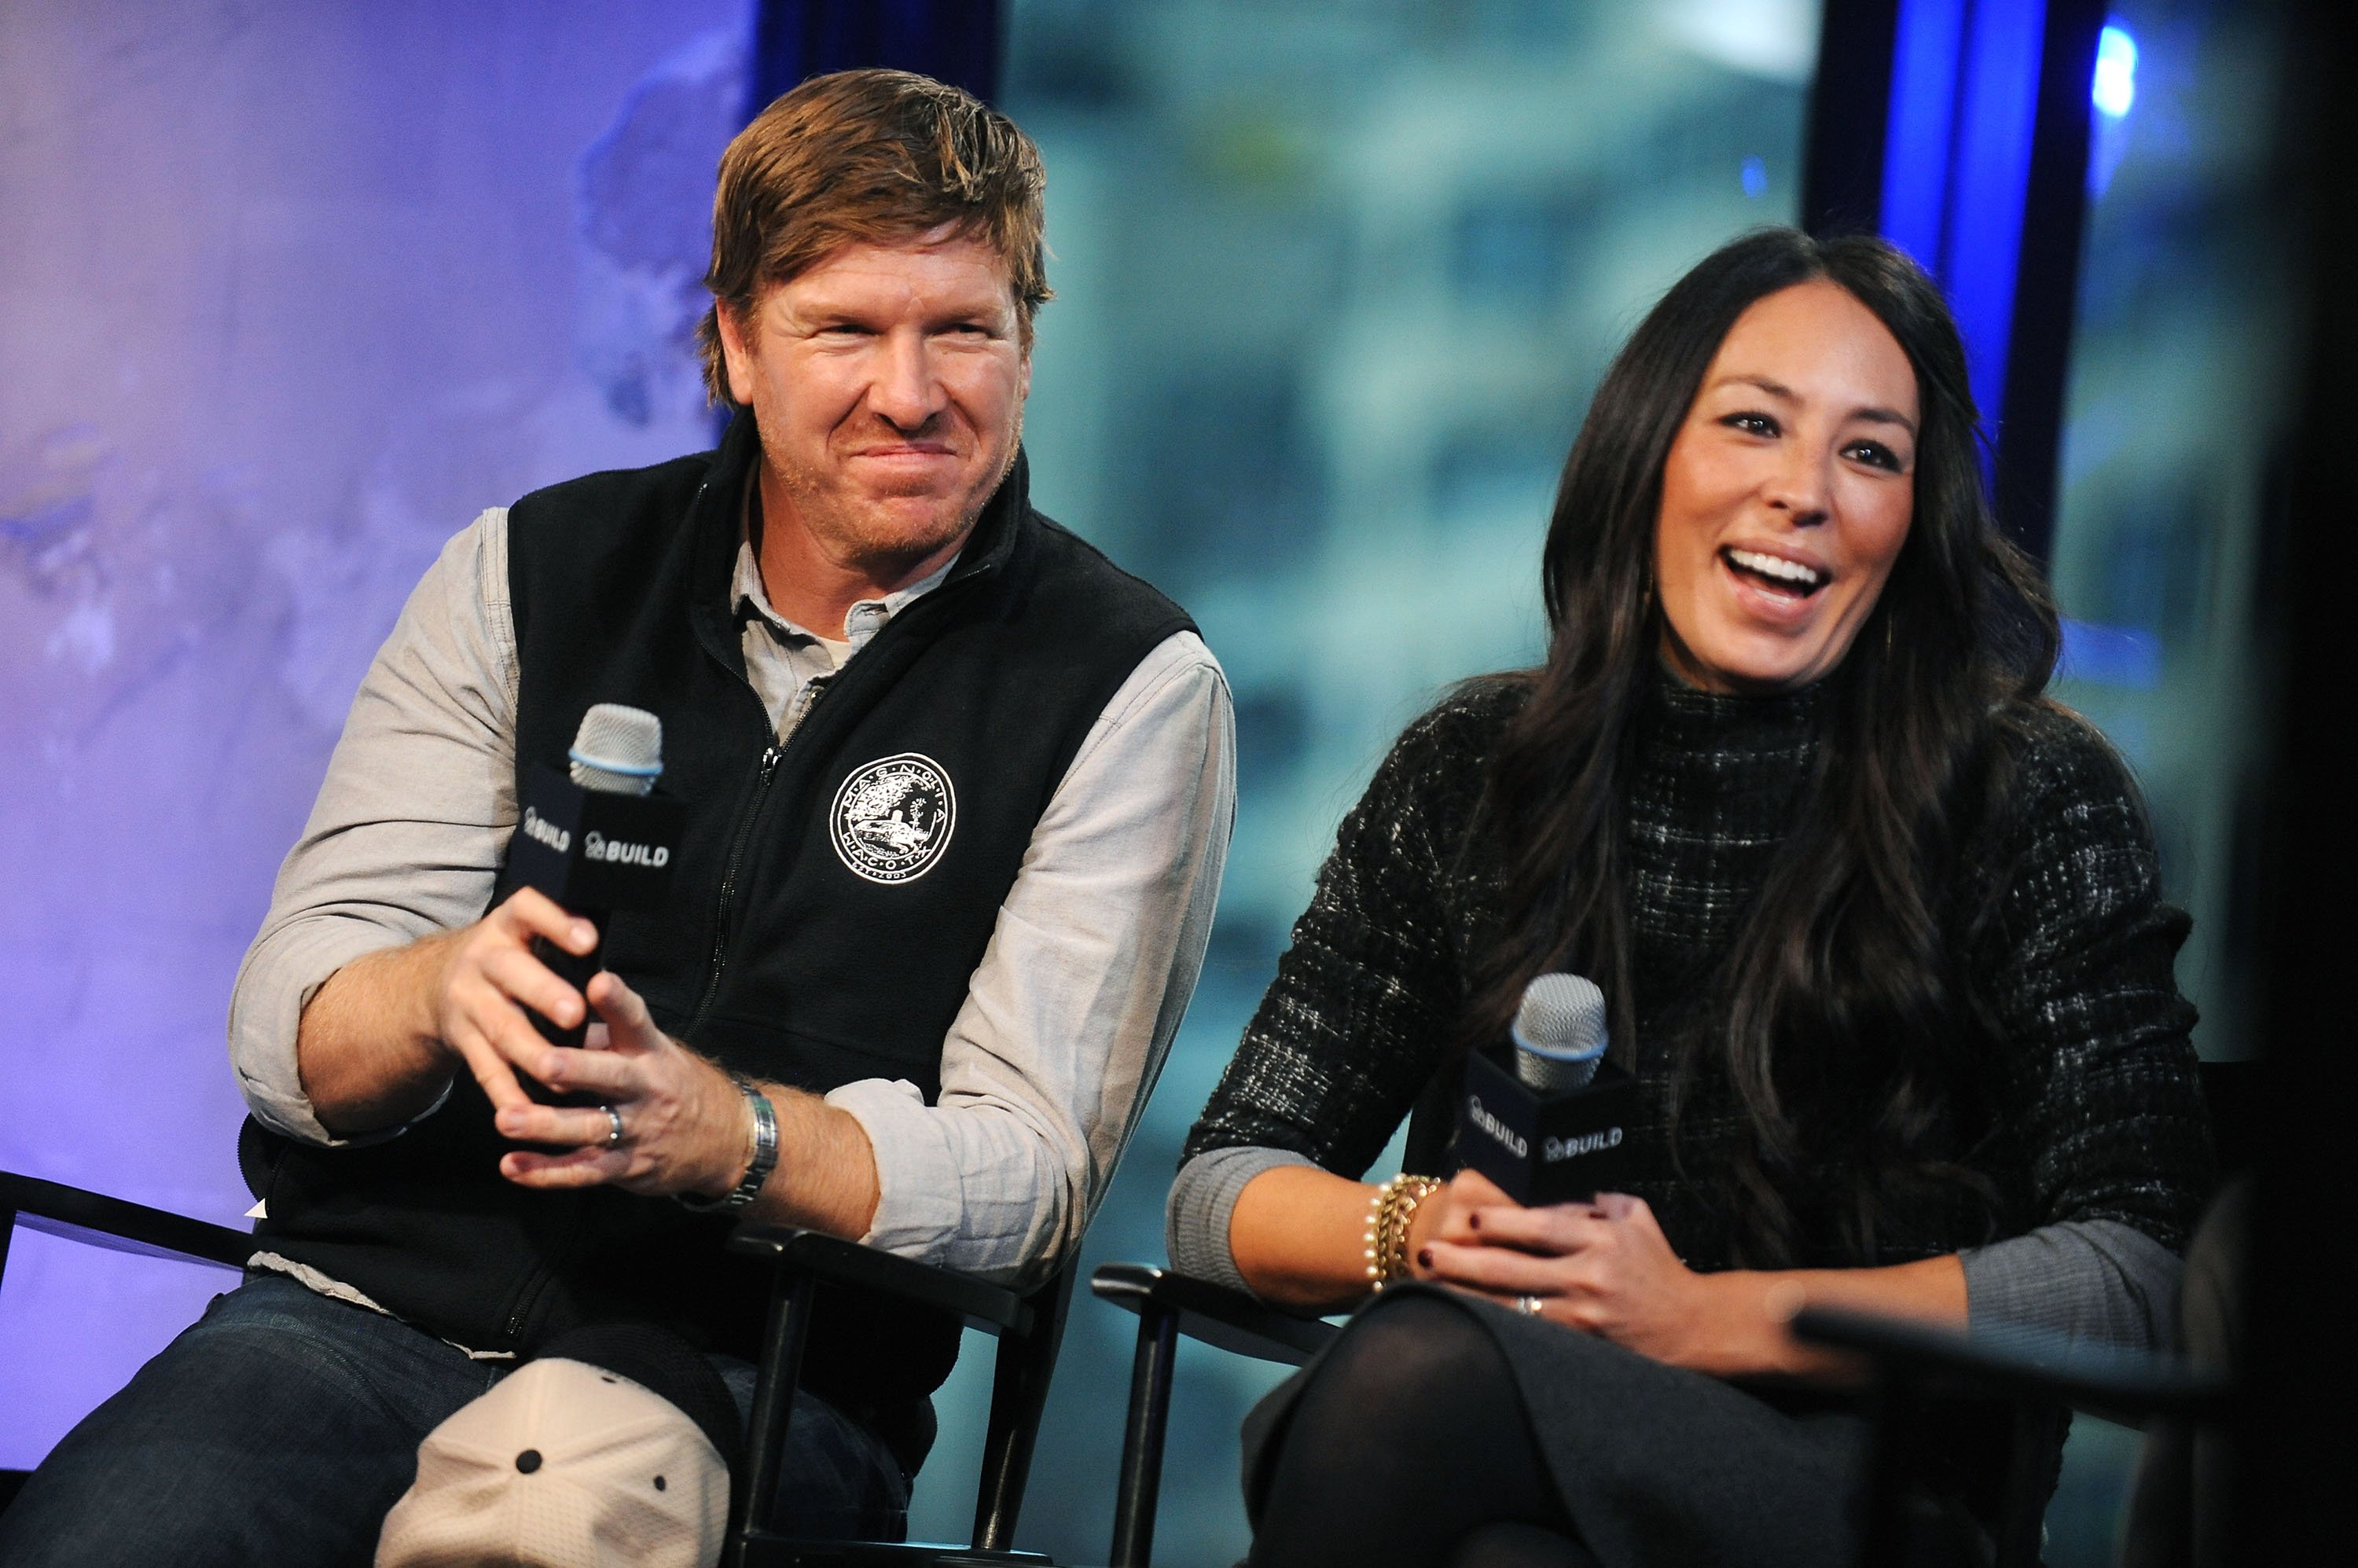 HGTV stars Chip Gaines and Joanna Gaines attend AOL Build Presents: "Upper fixator" at AOL Studios in New York on December 8, 2015 in New York |  Source: Getty Images